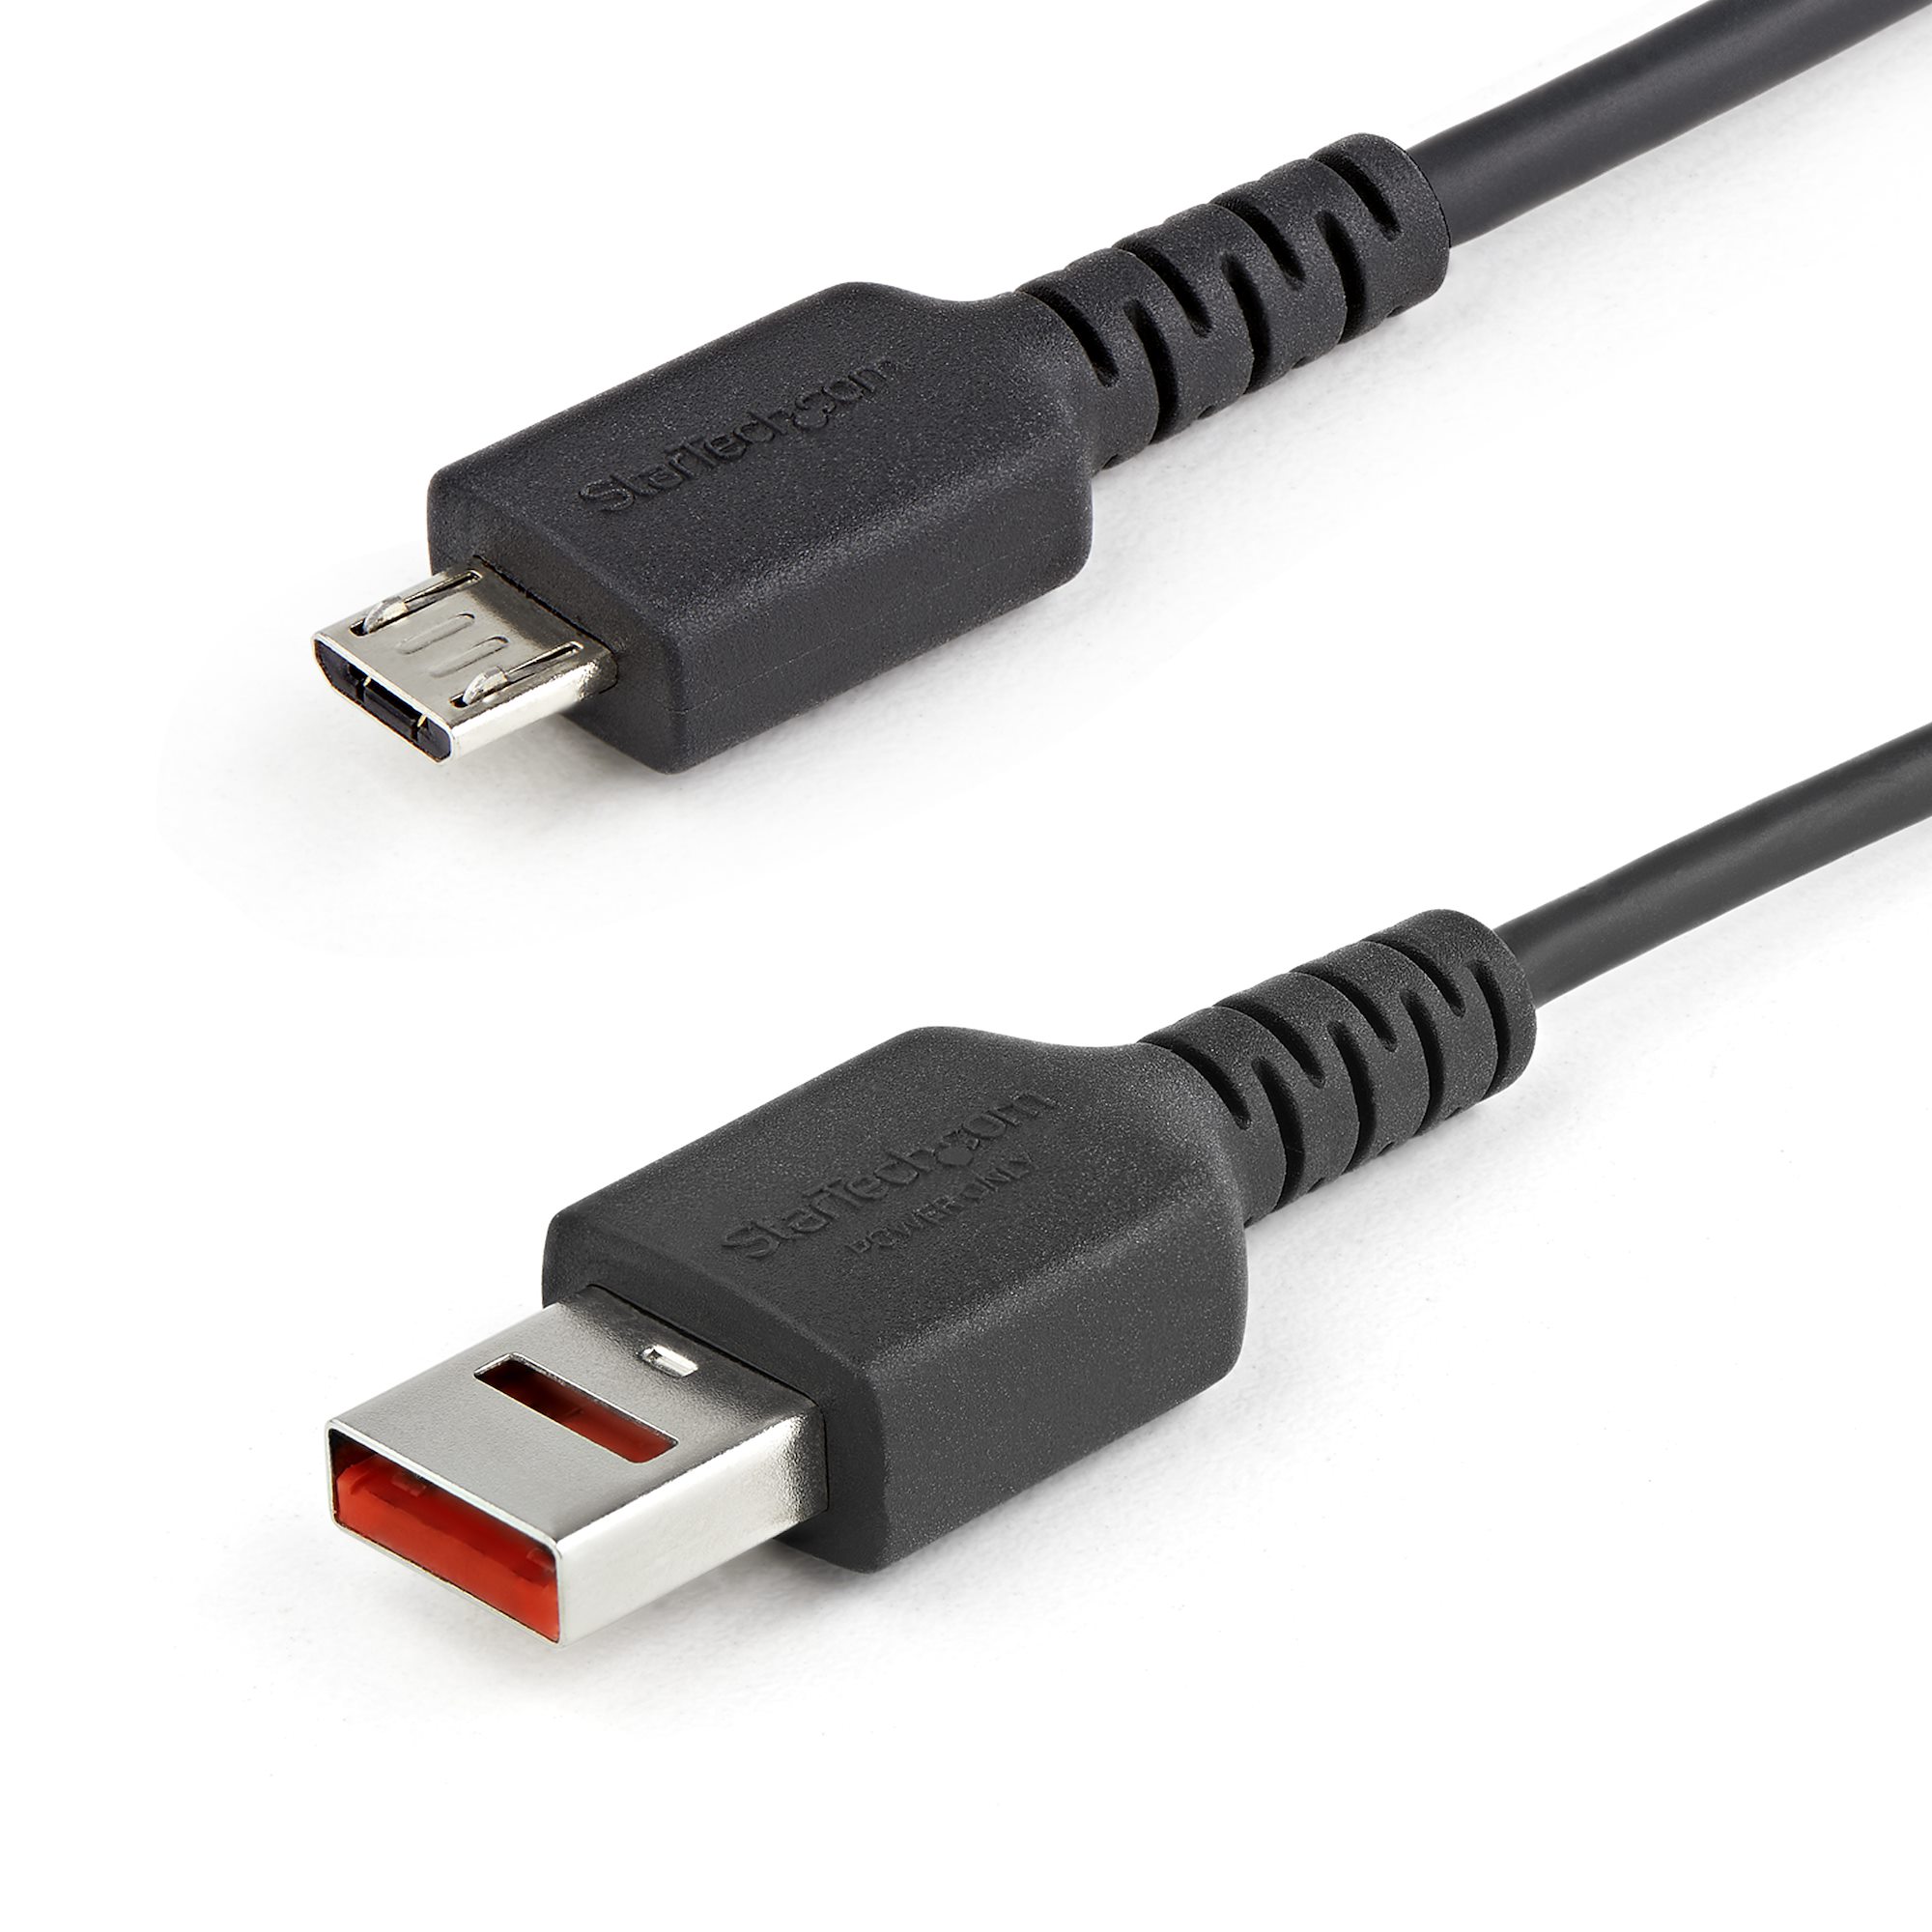 USB-A to Micro USB Secure Charging Cable - USB 2.0 Cables |